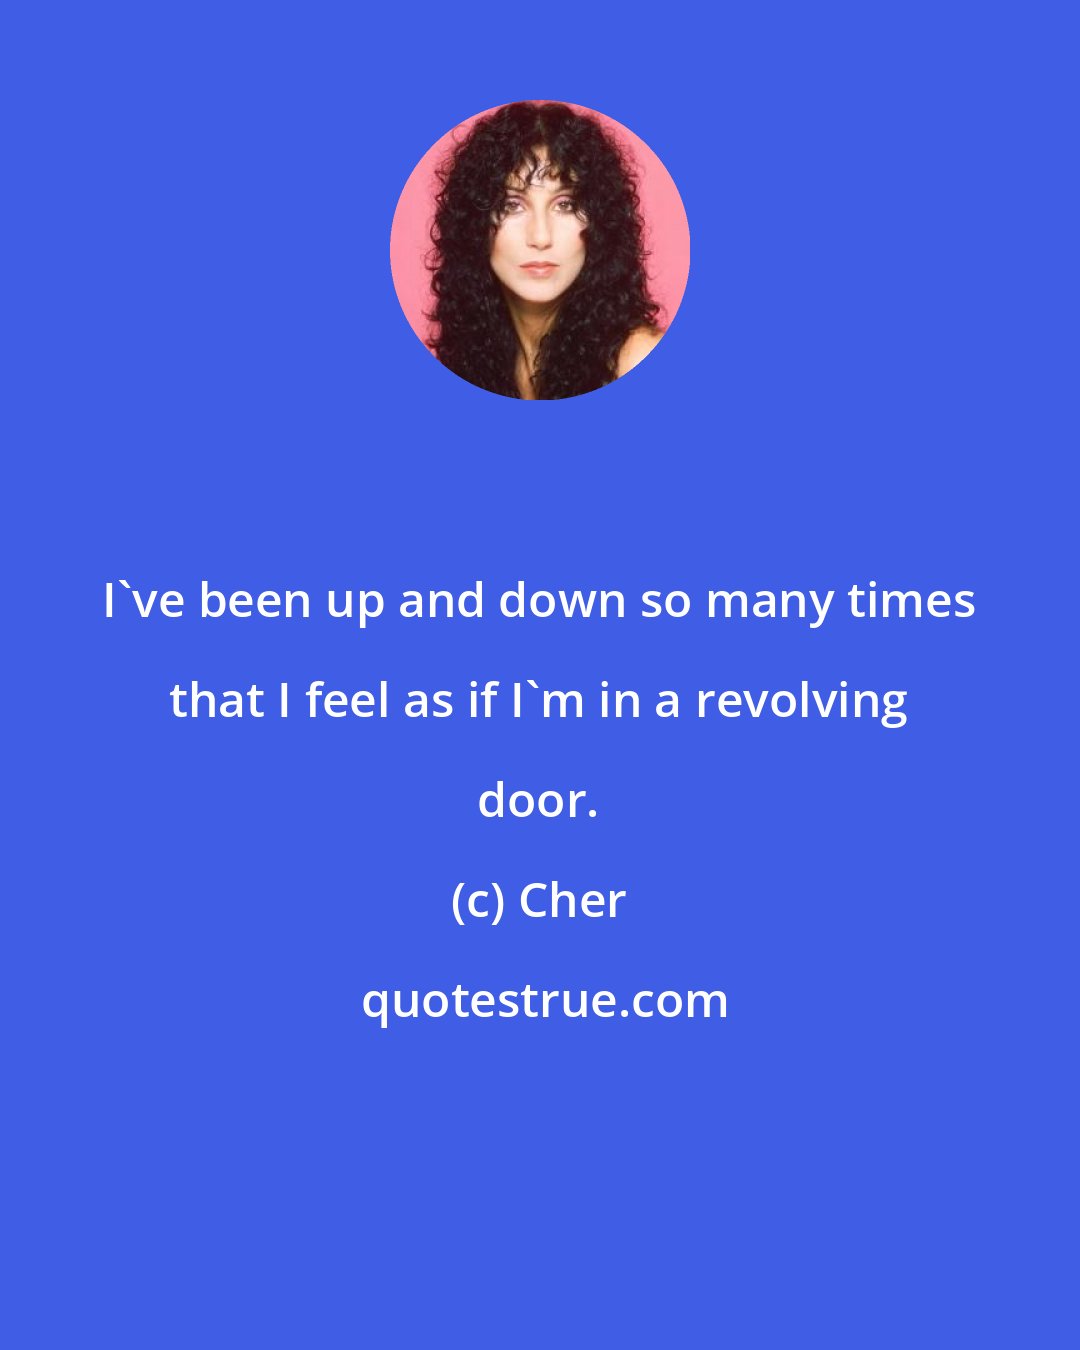 Cher: I've been up and down so many times that I feel as if I'm in a revolving door.